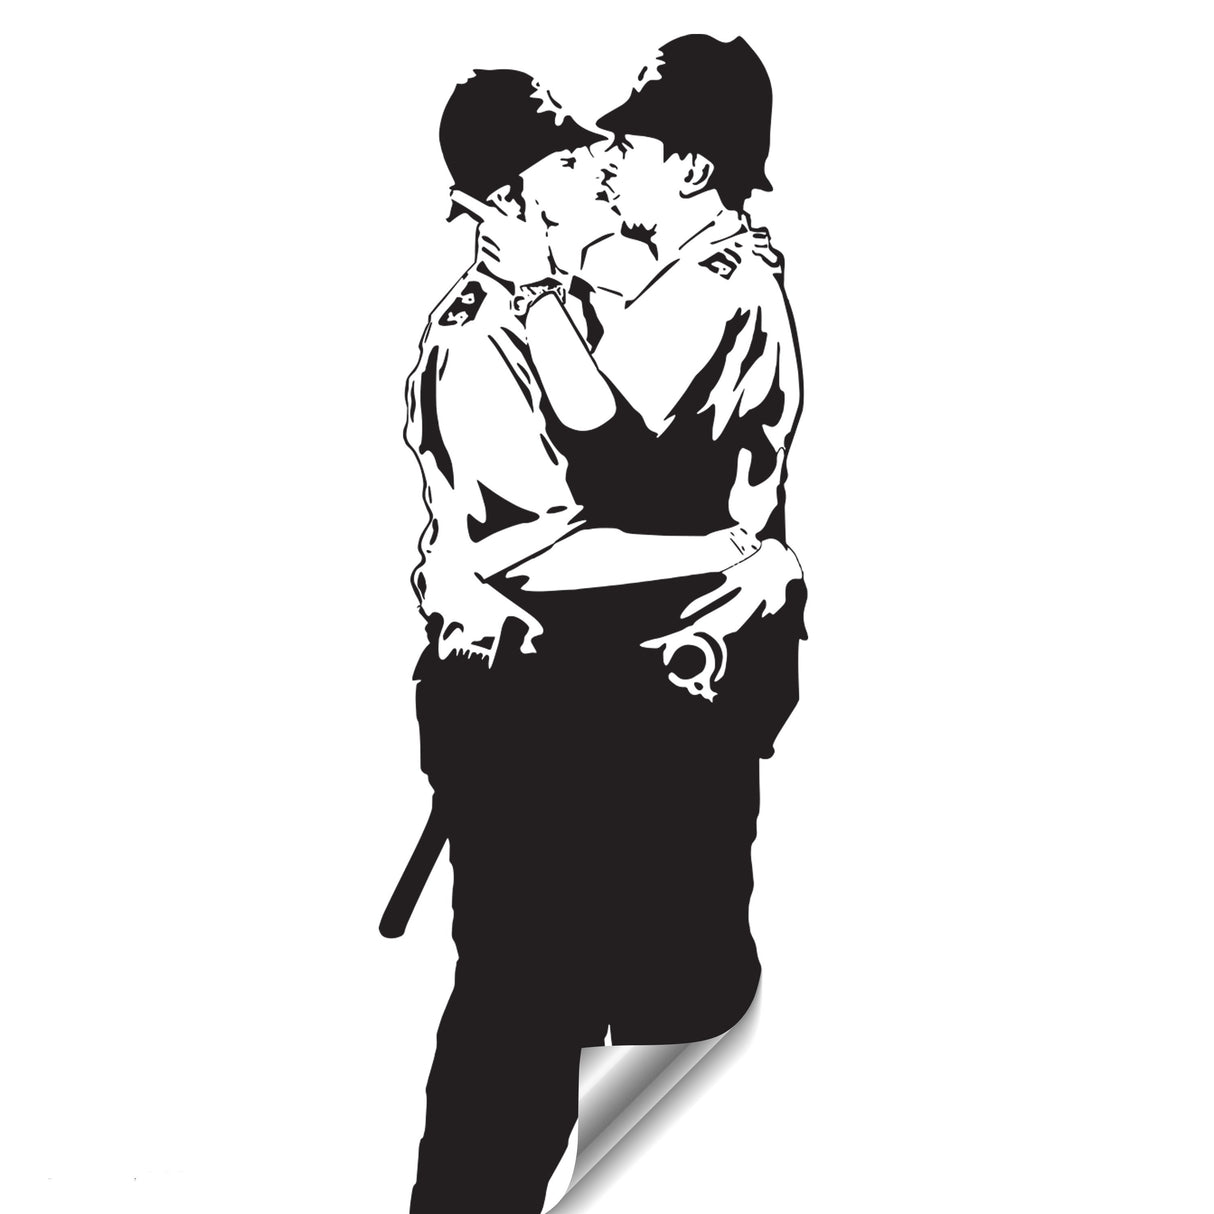 Banksy Police Kissing Wall Sticker - Street Art Peel and Stick Vinyl Decal